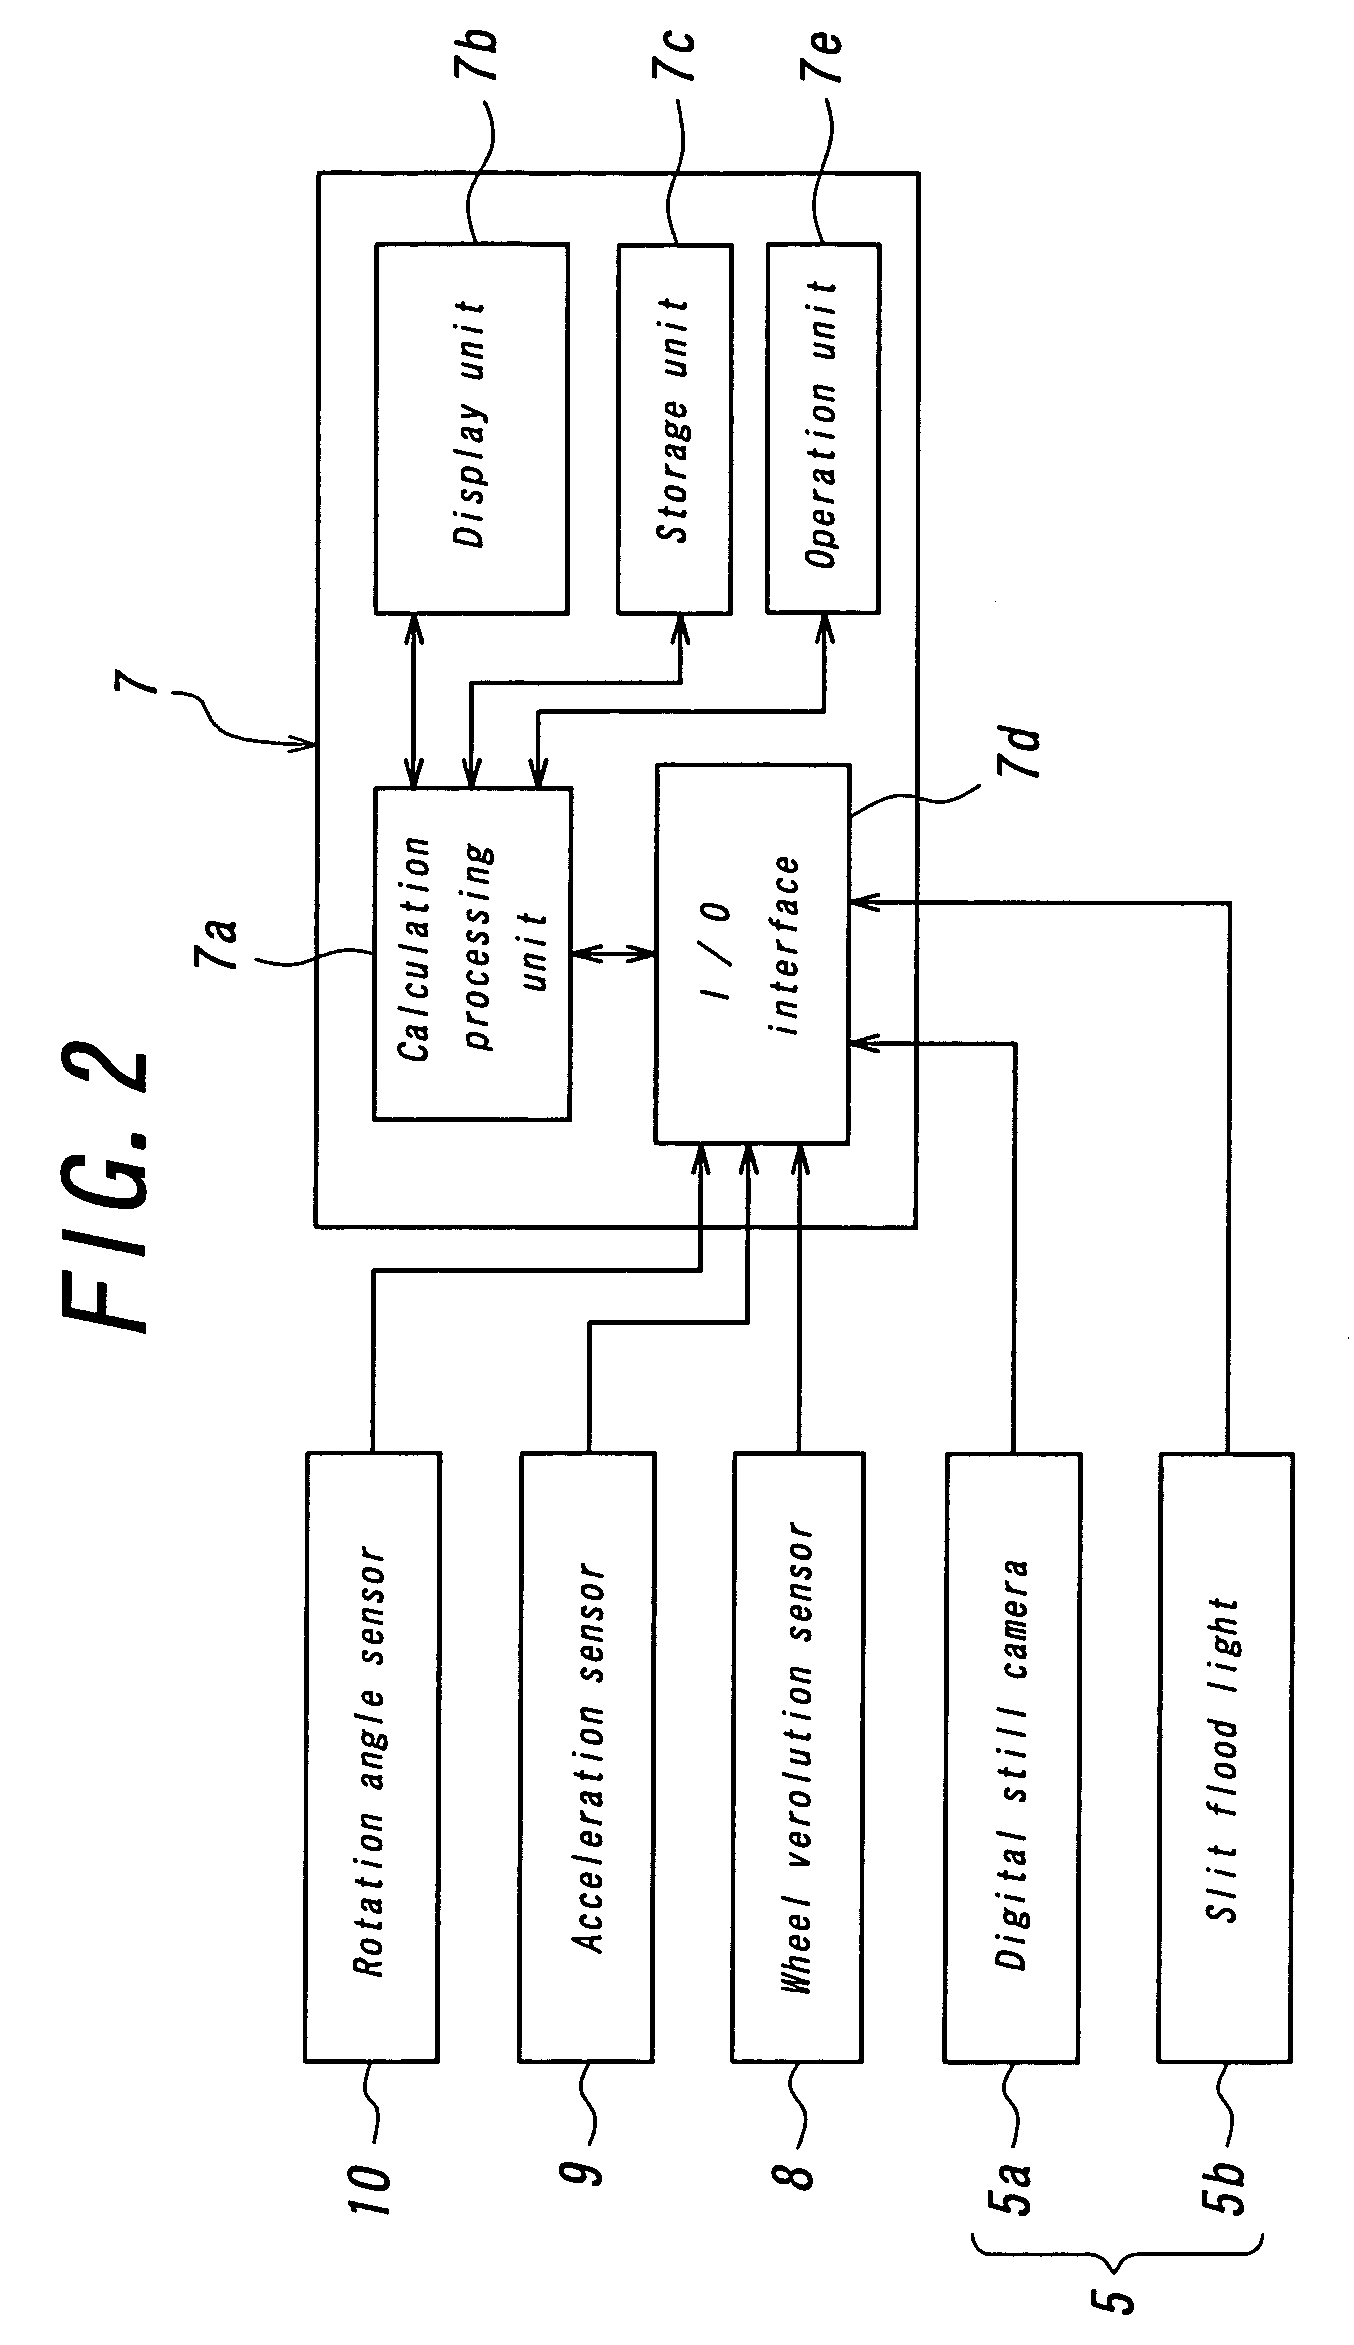 Mobile measurement system of three-dimensional structure